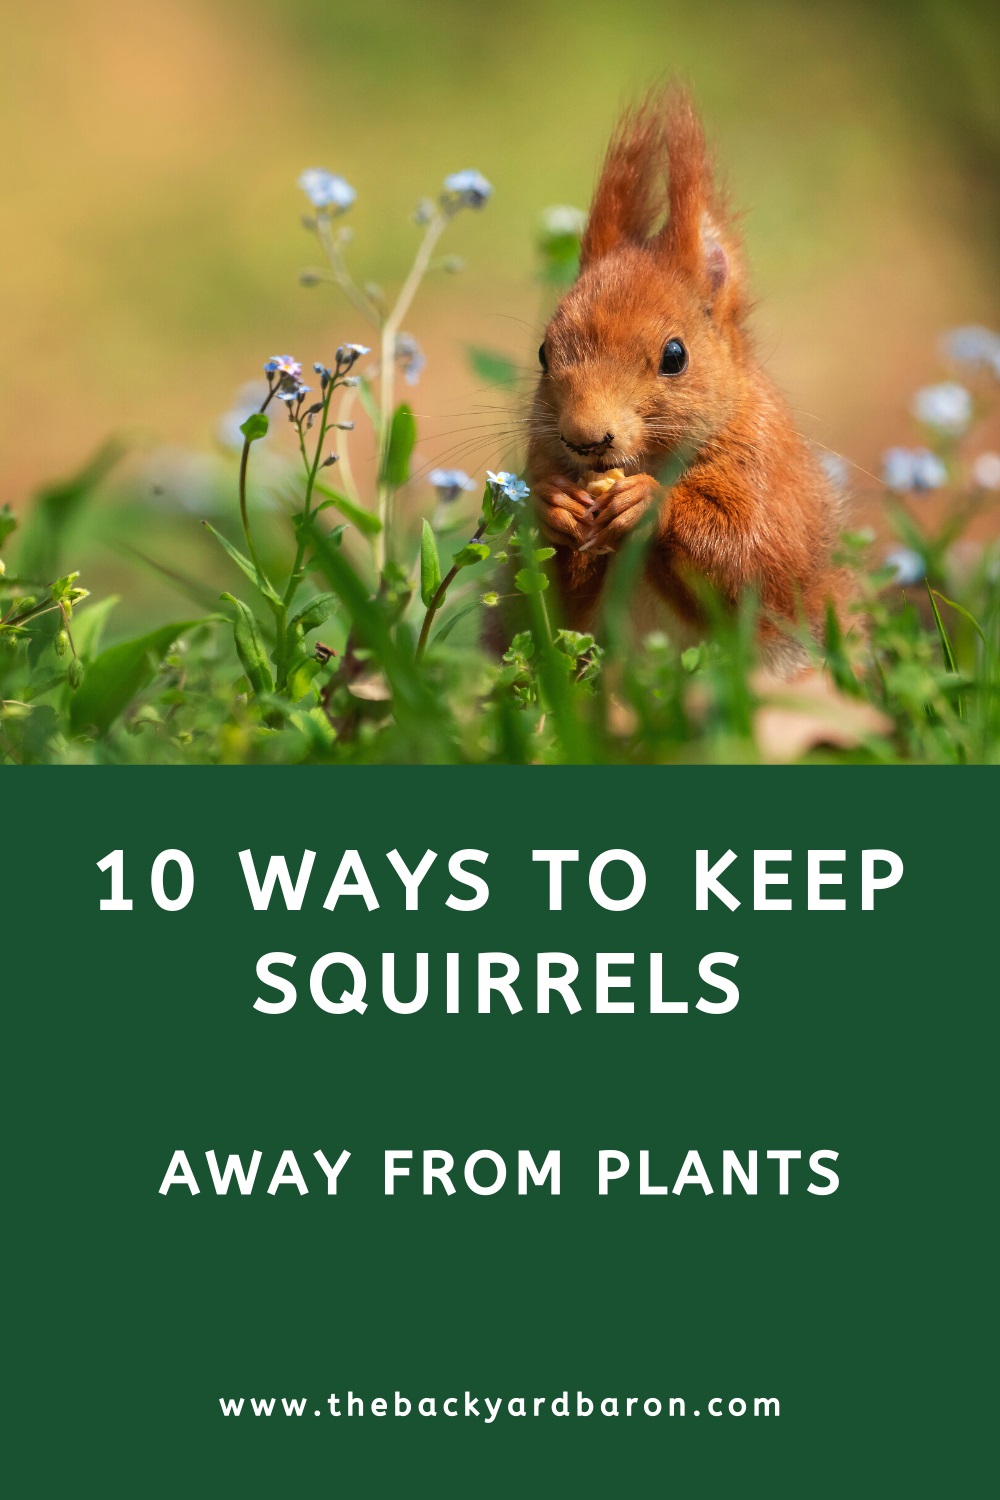 How to stop squirrels from digging up plants (10 tips)